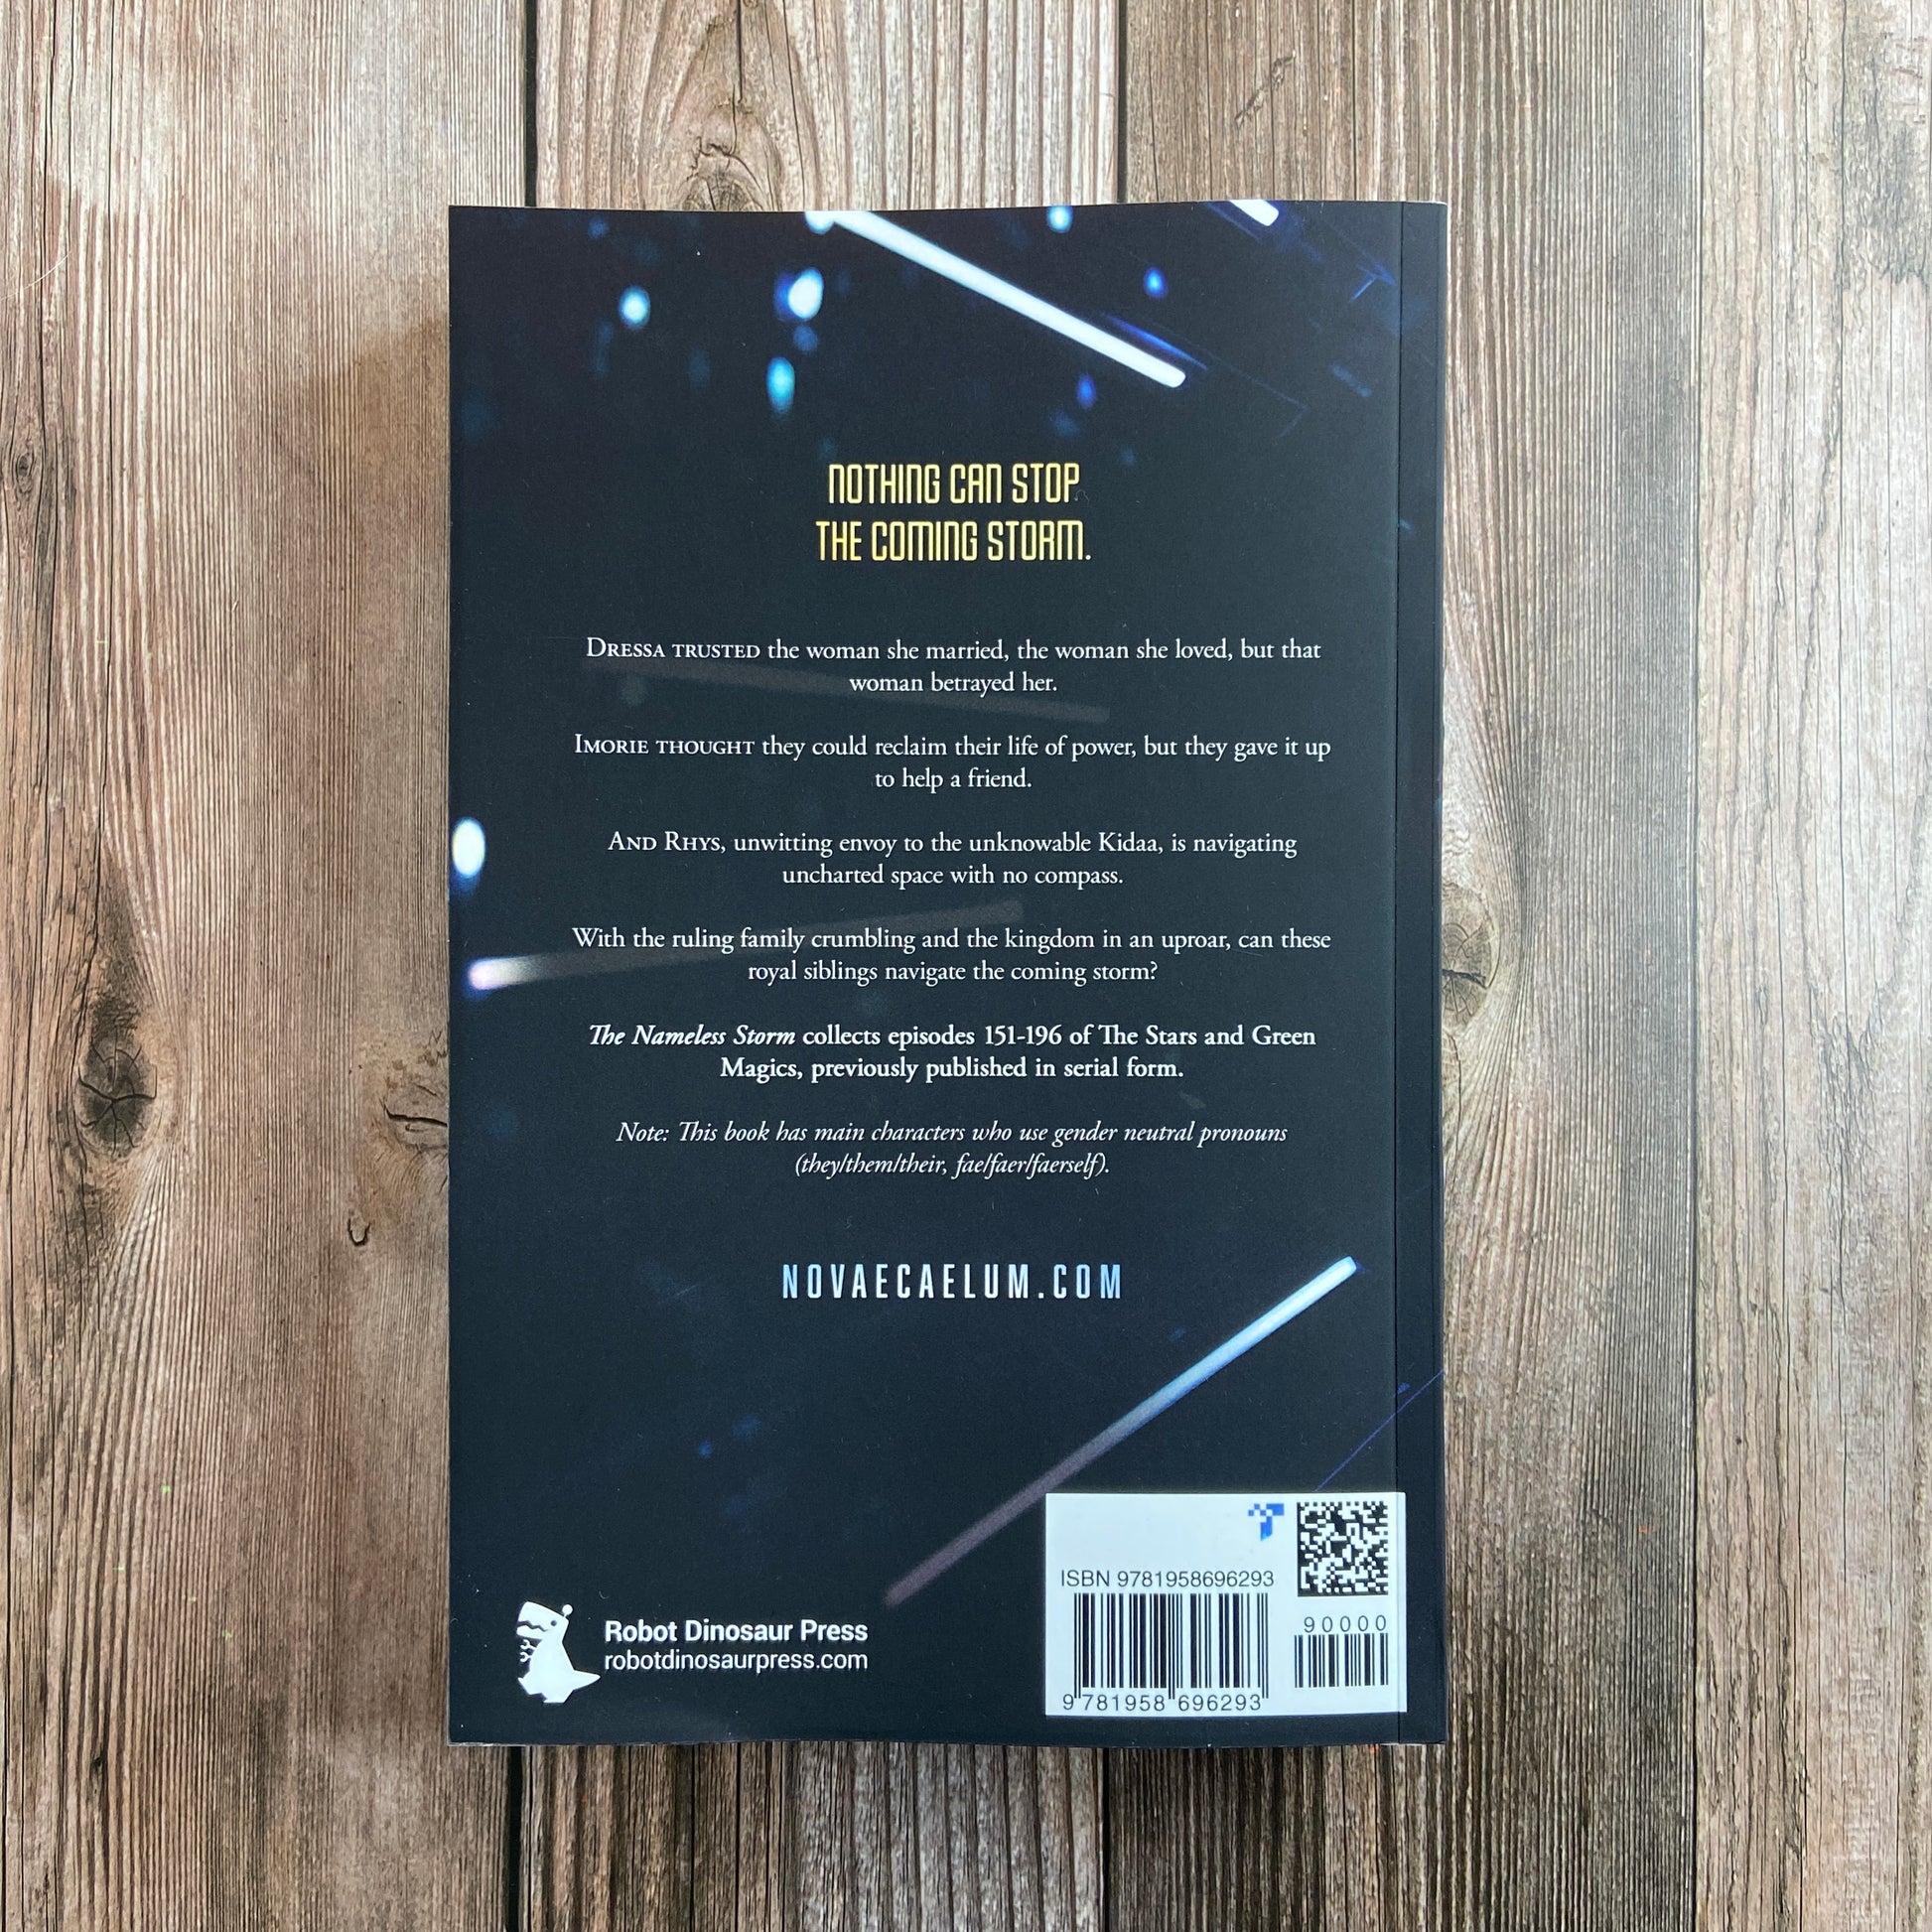 A photo of the back cover of a Novae Caelum book titled "SIGNED The Nameless Storm: The Stars and Green Magics Book 5 (Paperback)" with a description, author quotes, and website information on a wooden background.